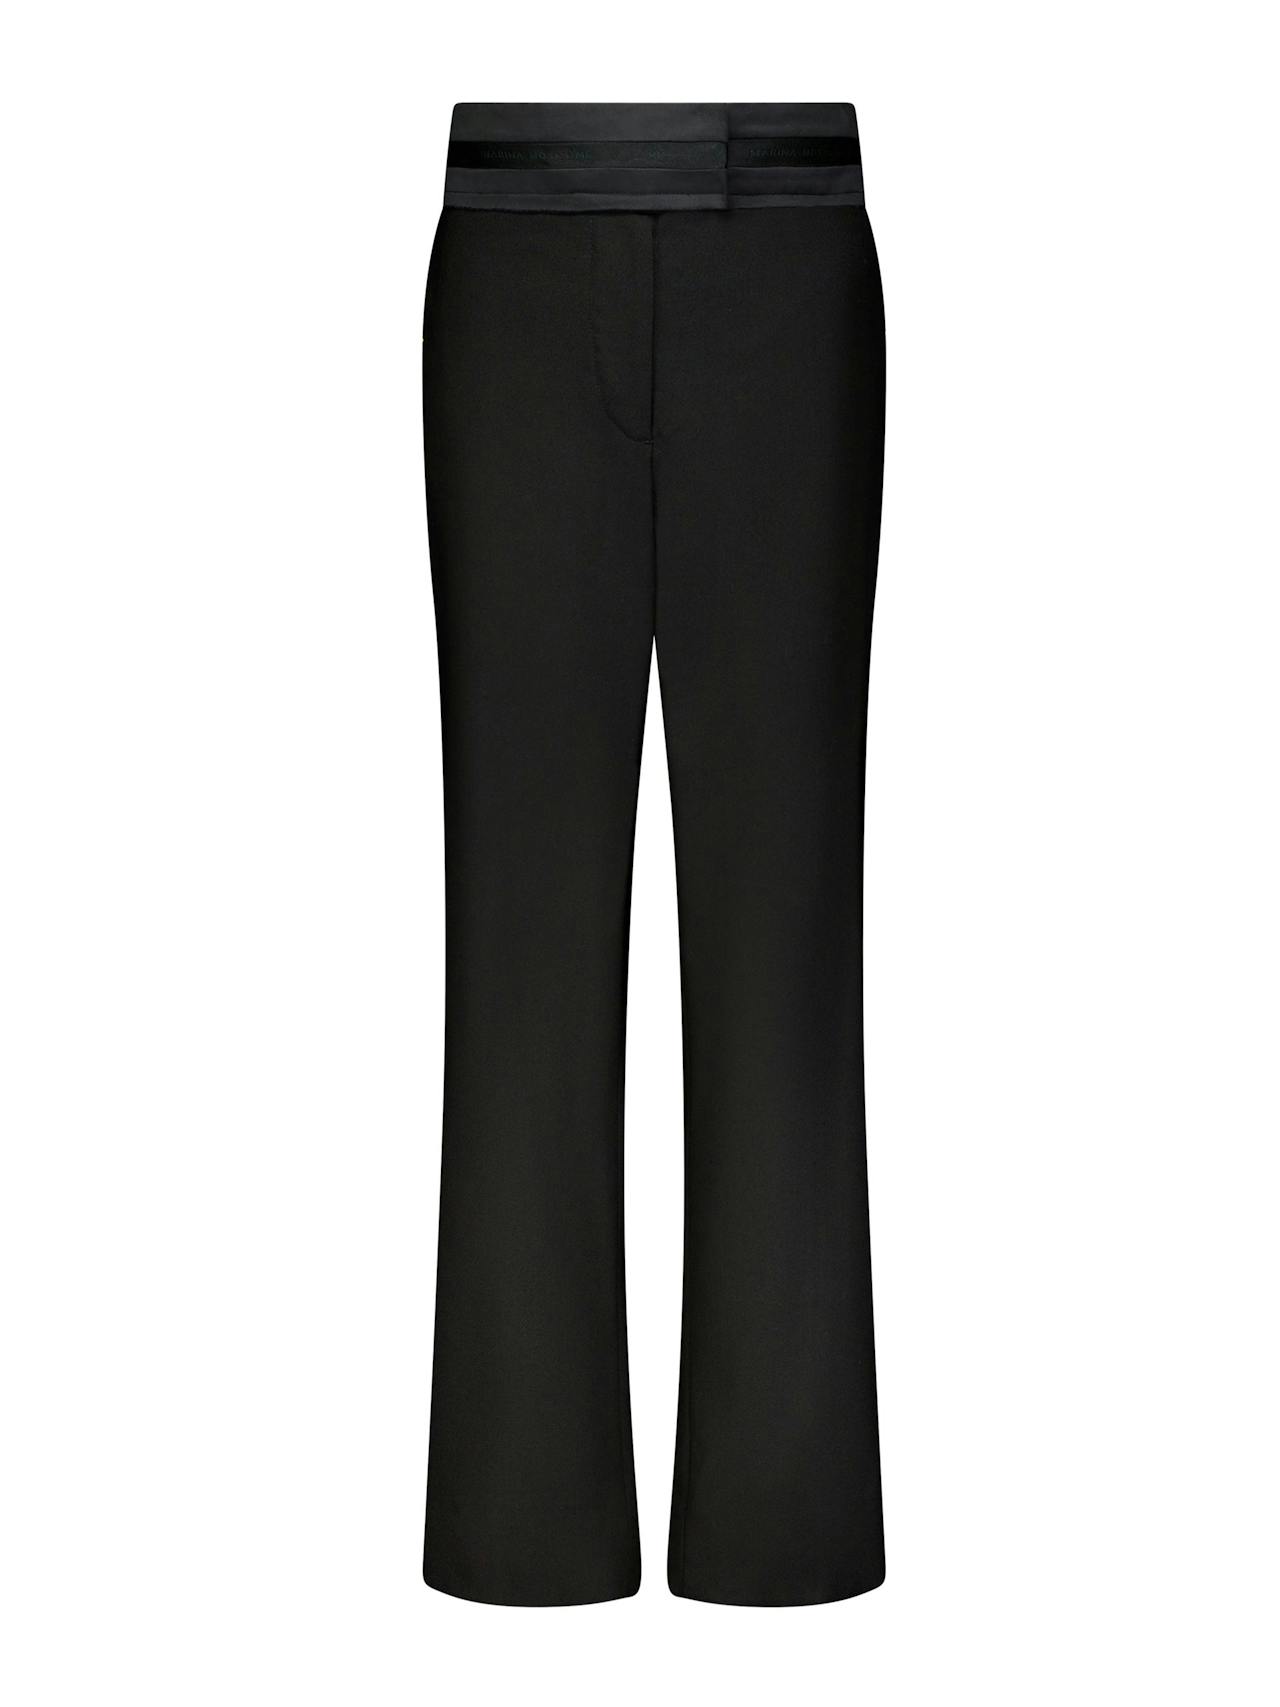 Black relaxed trouser, with raw edge detail